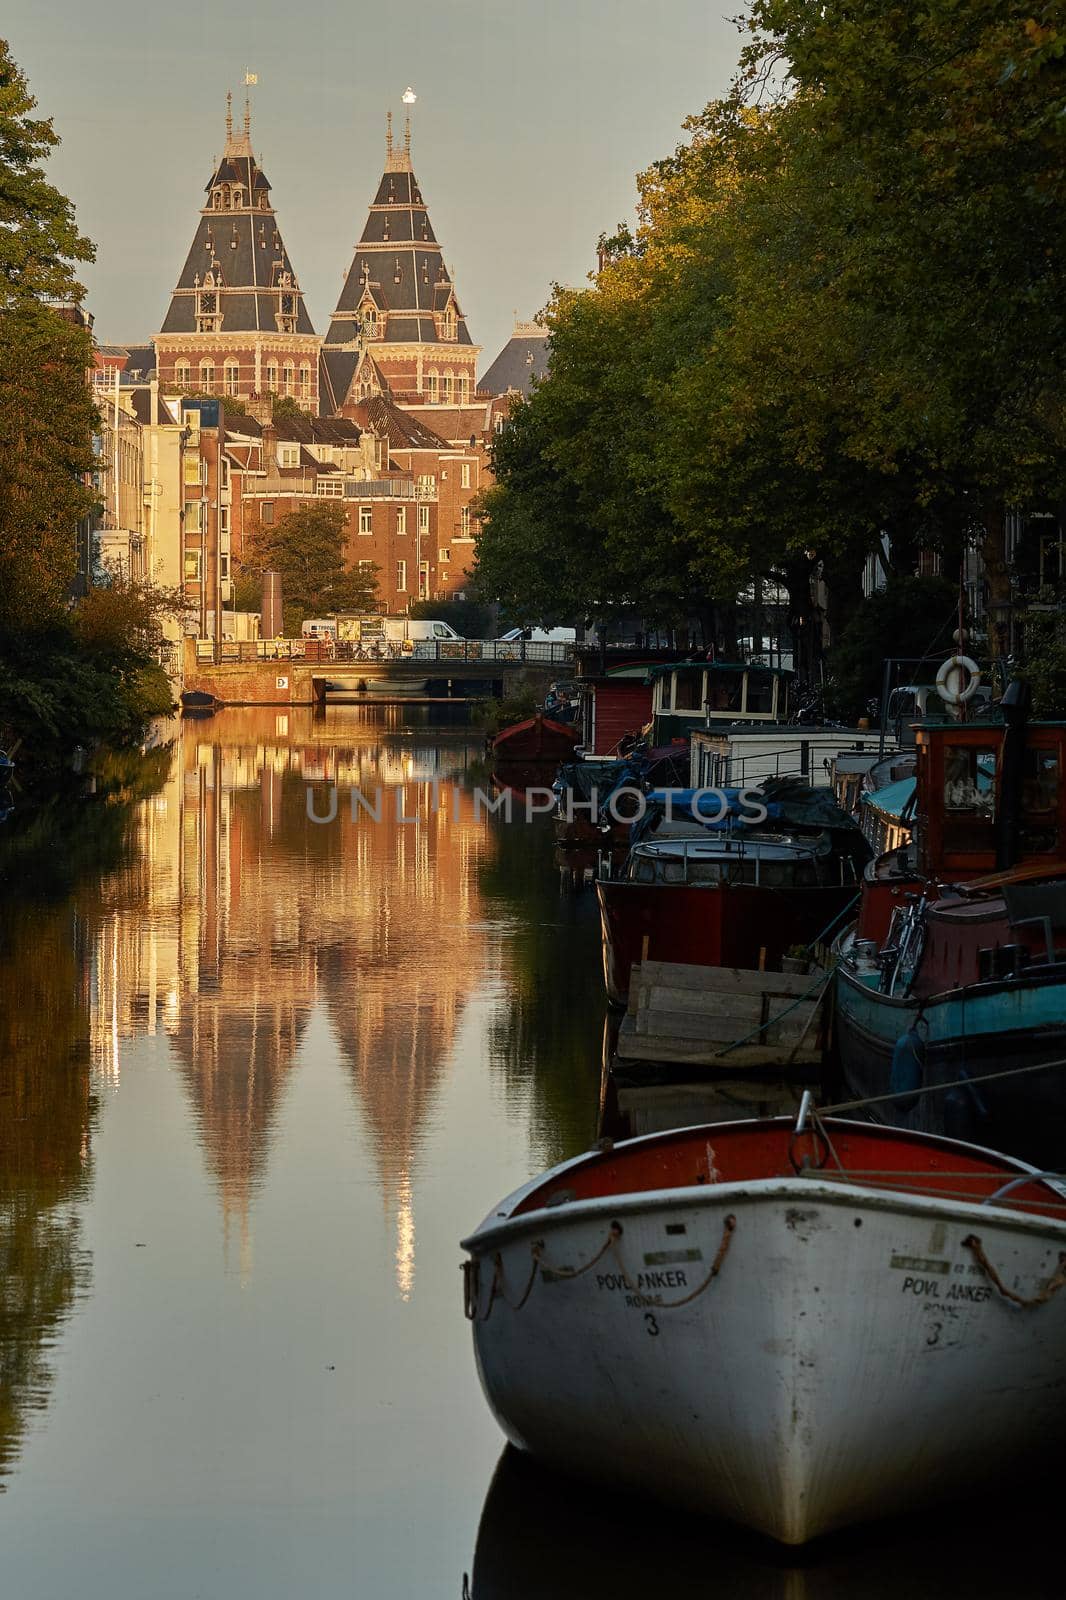 One of the churches of Amsterdam in Netherlands, unique with city scene along canal in morning natural light by wondry